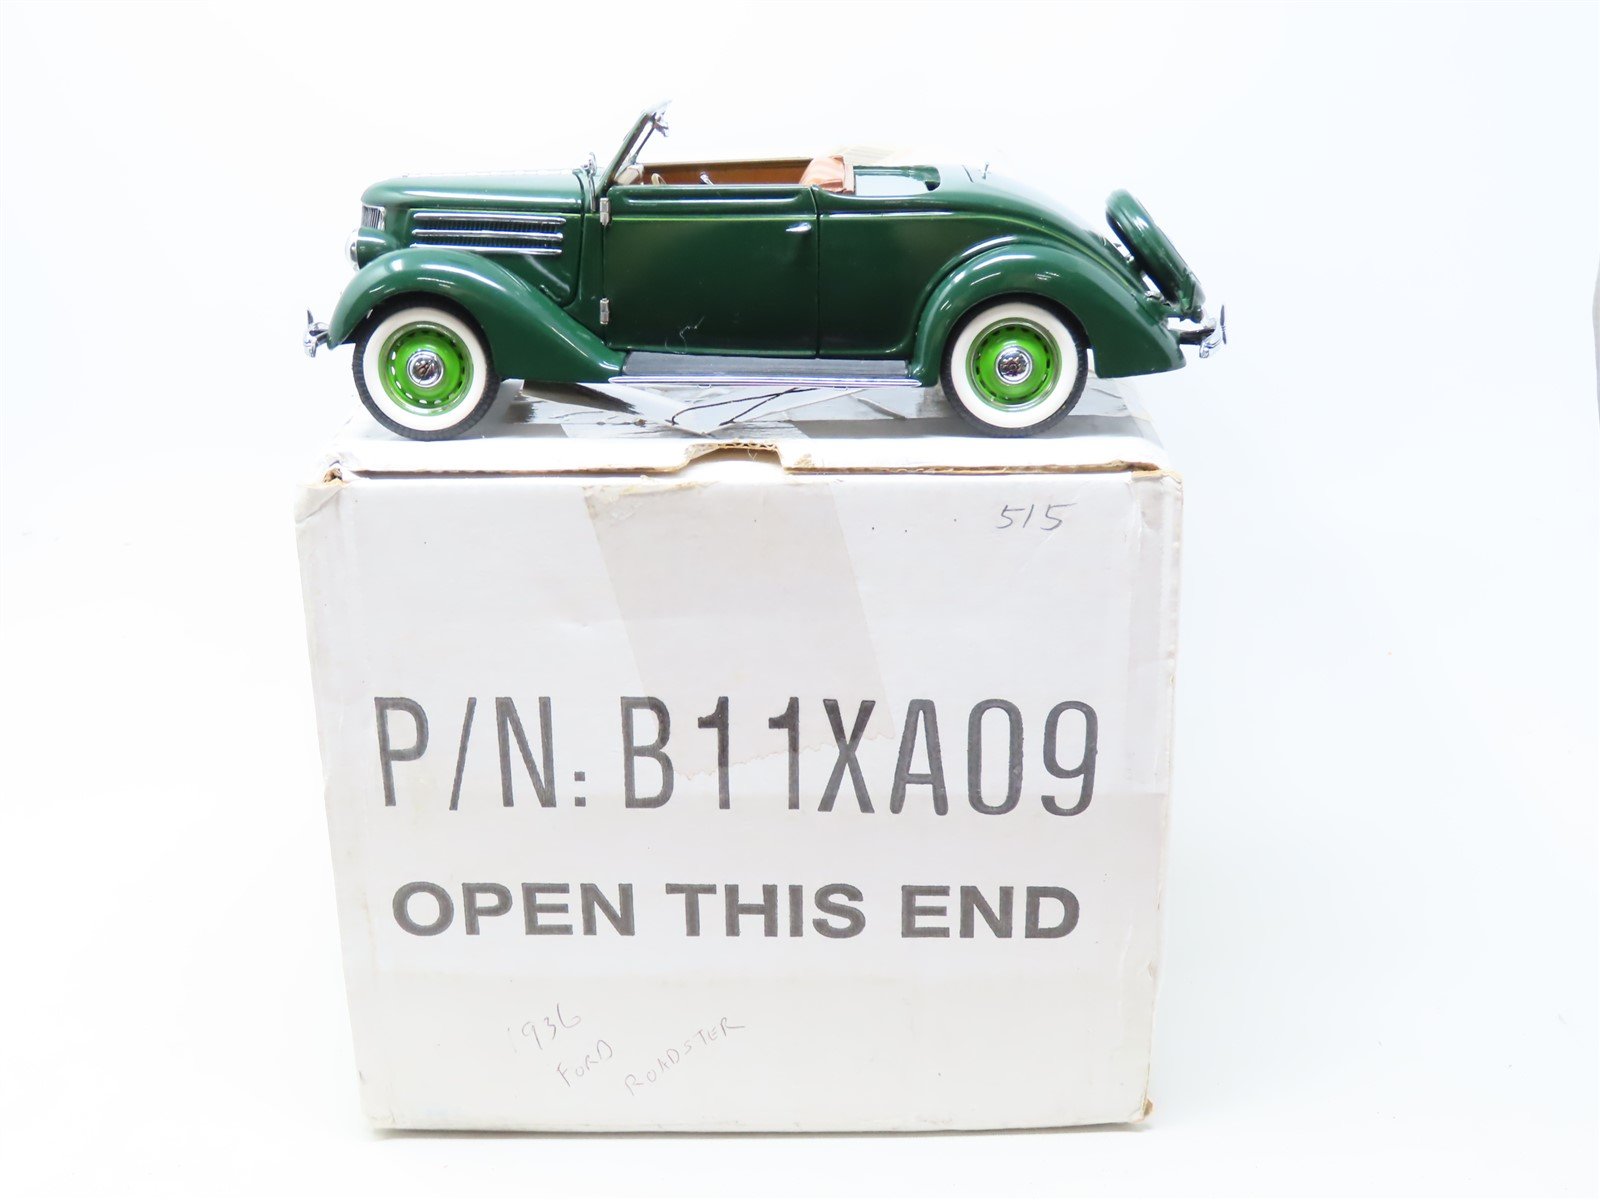 1/24 Scale Franklin Mint #B11XA09 Die-Cast 1936 Ford Cabriolet Convertible